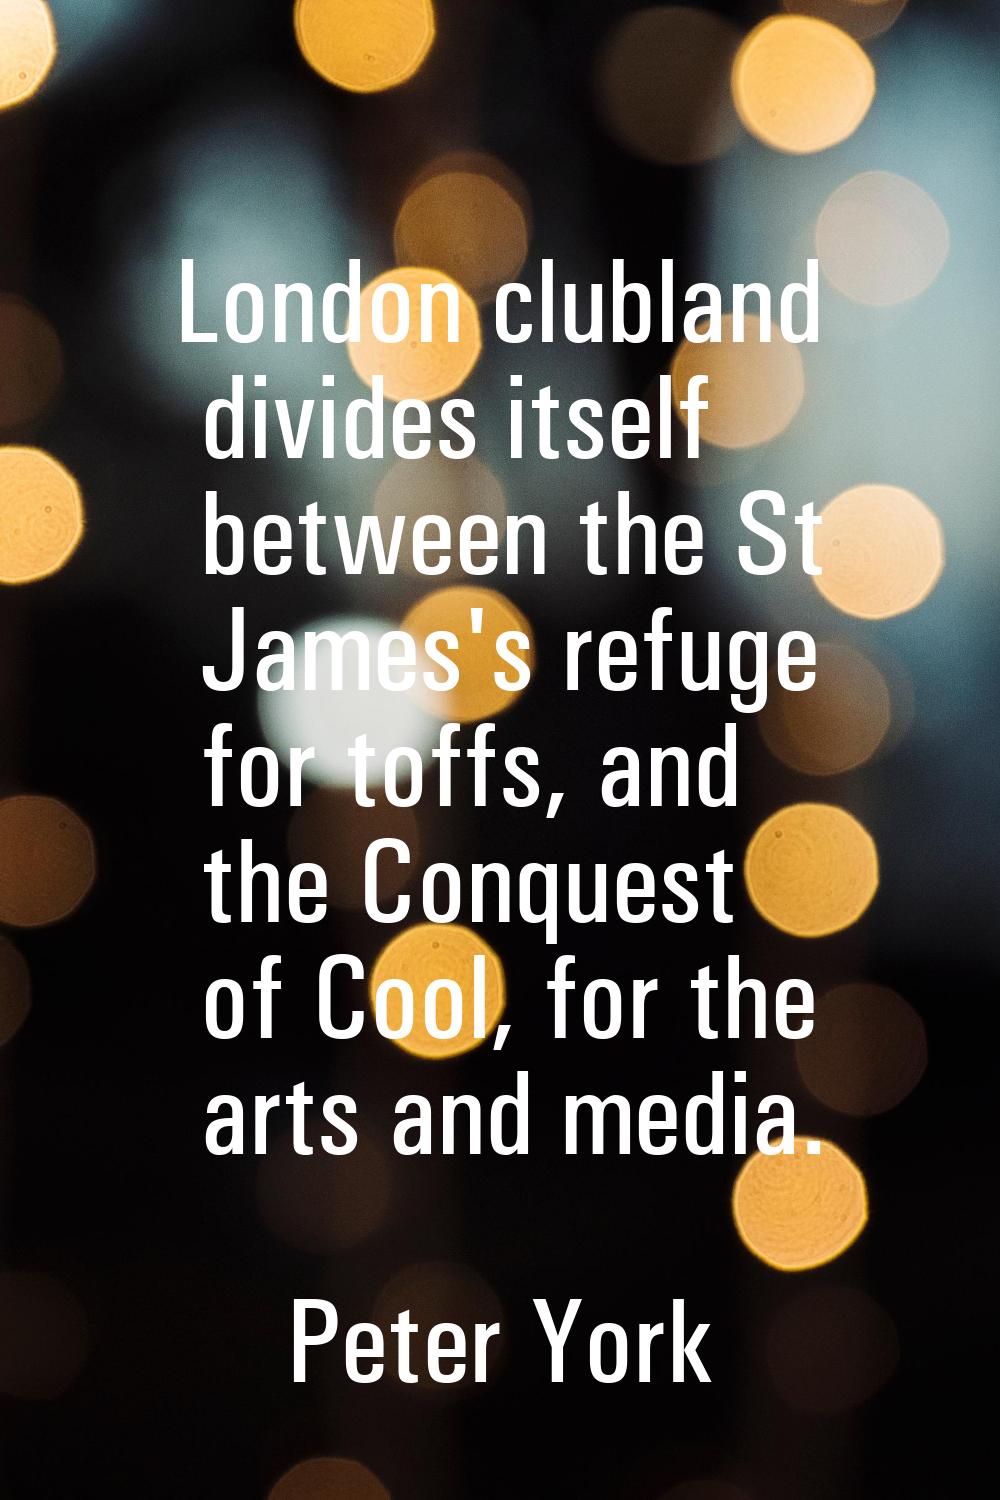 London clubland divides itself between the St James's refuge for toffs, and the Conquest of Cool, f